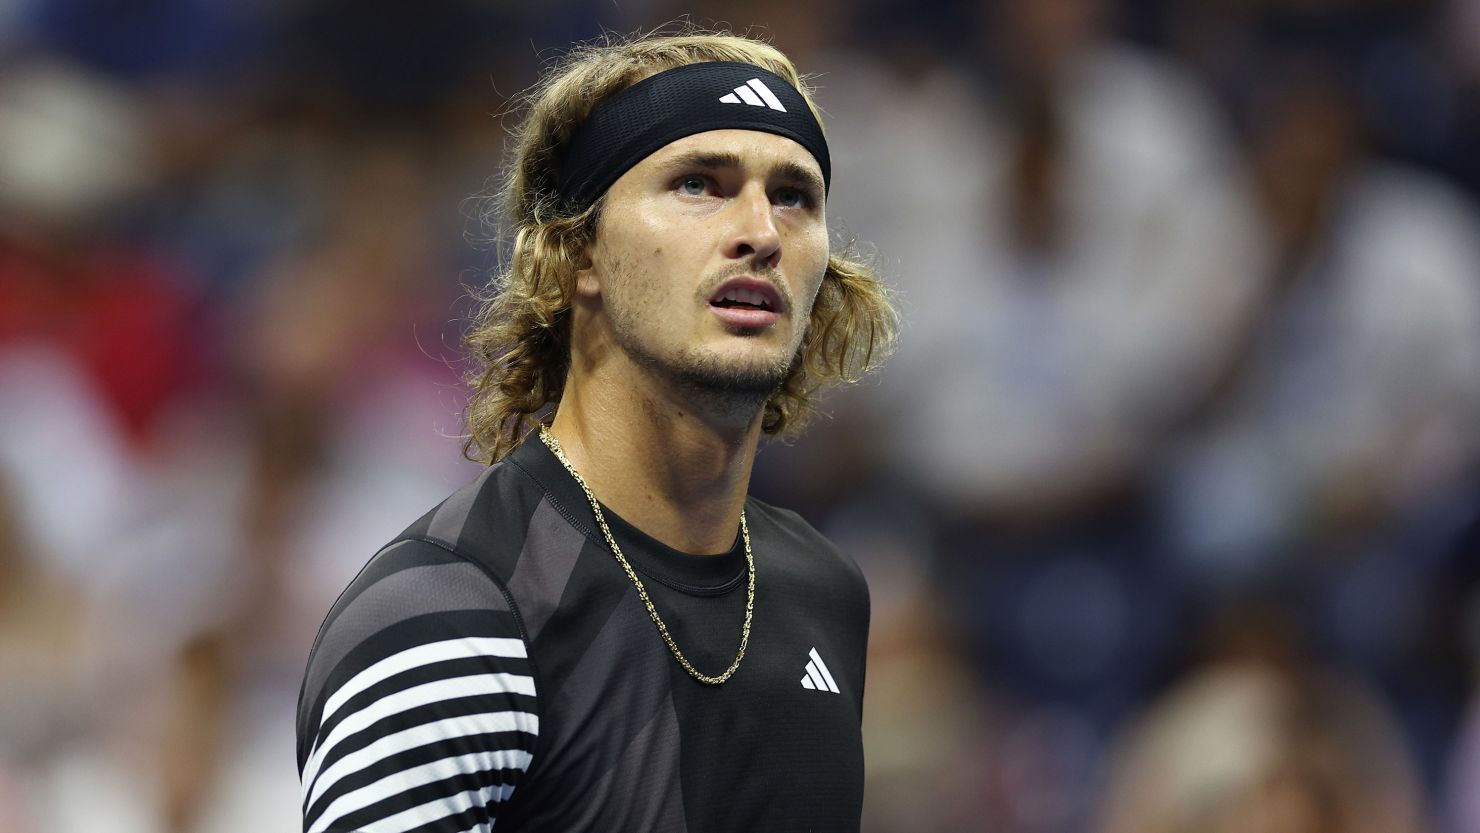 NEW YORK, NEW YORK - SEPTEMBER 06: Alexander Zverev of Germany reacts against Carlos Alcaraz of Spain during their Men's Singles Quarterfinal match on Day Ten of the 2023 US Open at the USTA Billie Jean King National Tennis Center on September 06, 2023 in the Flushing neighborhood of the Queens borough of New York City. (Photo by Elsa/Getty Images)